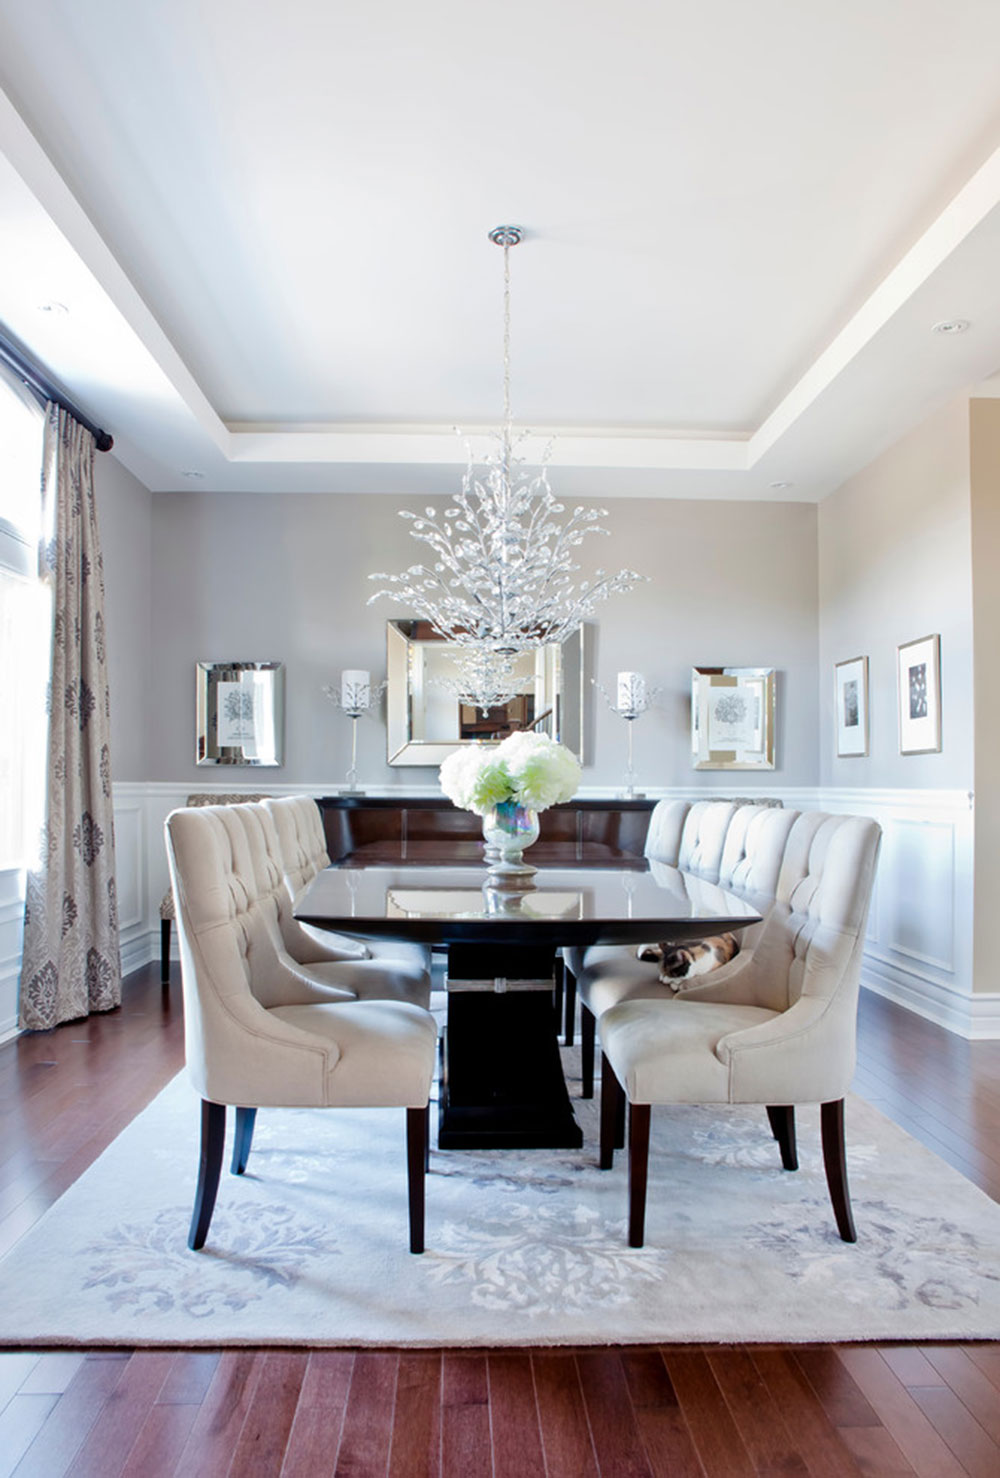 How to choose a chandelier for the dining room1 How to choose a chandelier for the dining room